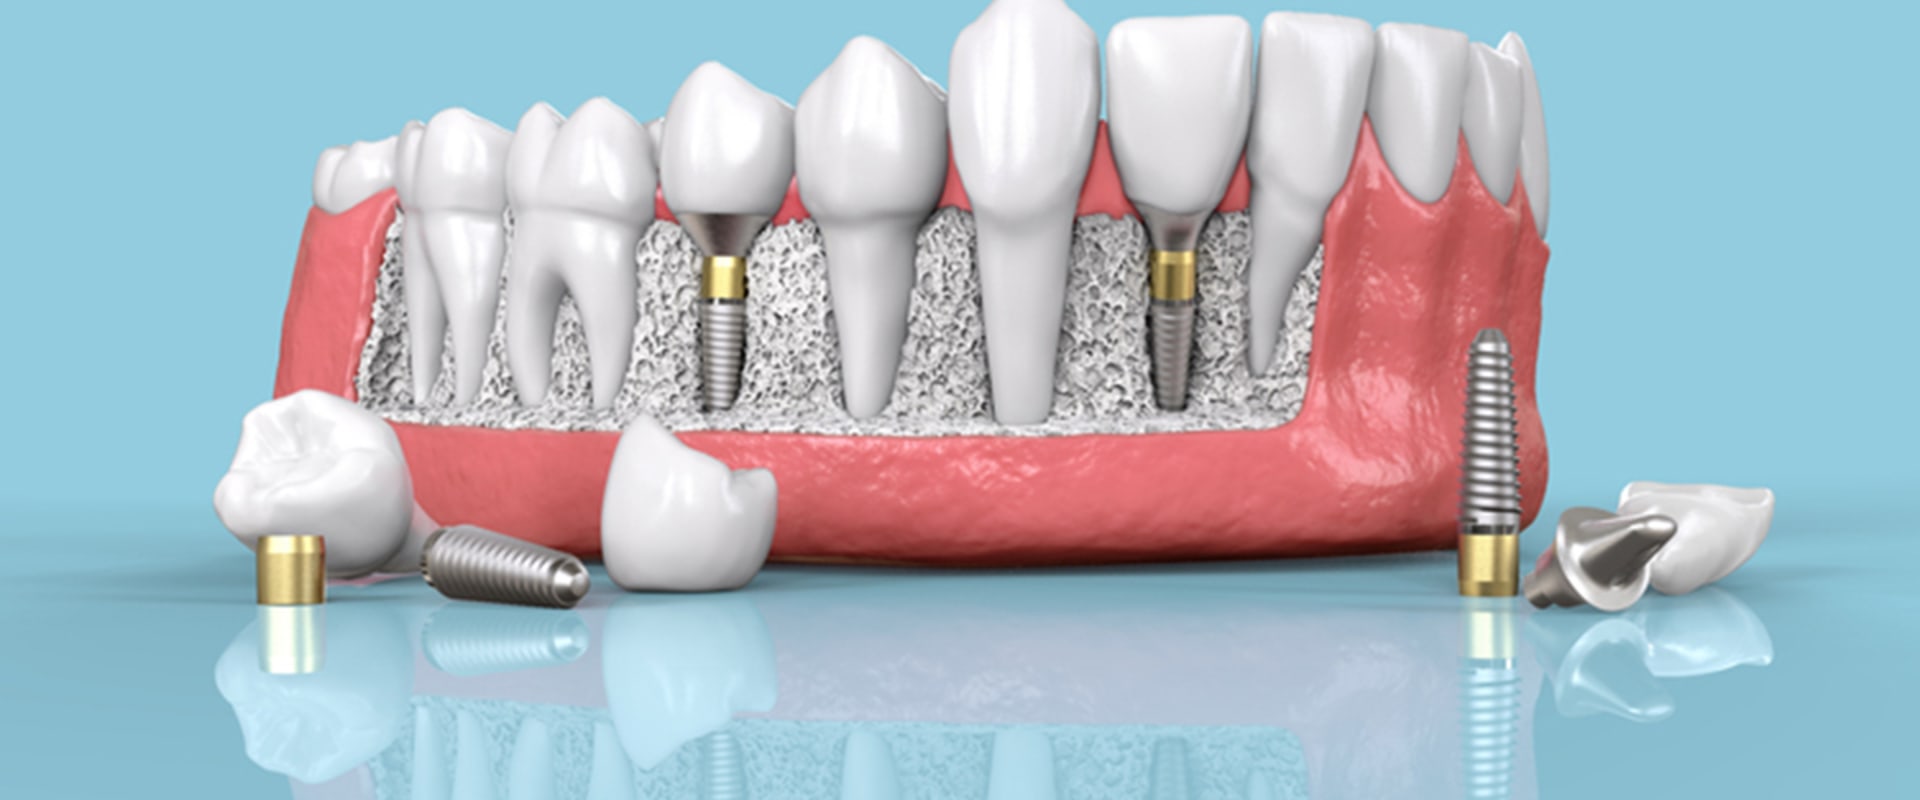 Do dental implants have an expiration date?